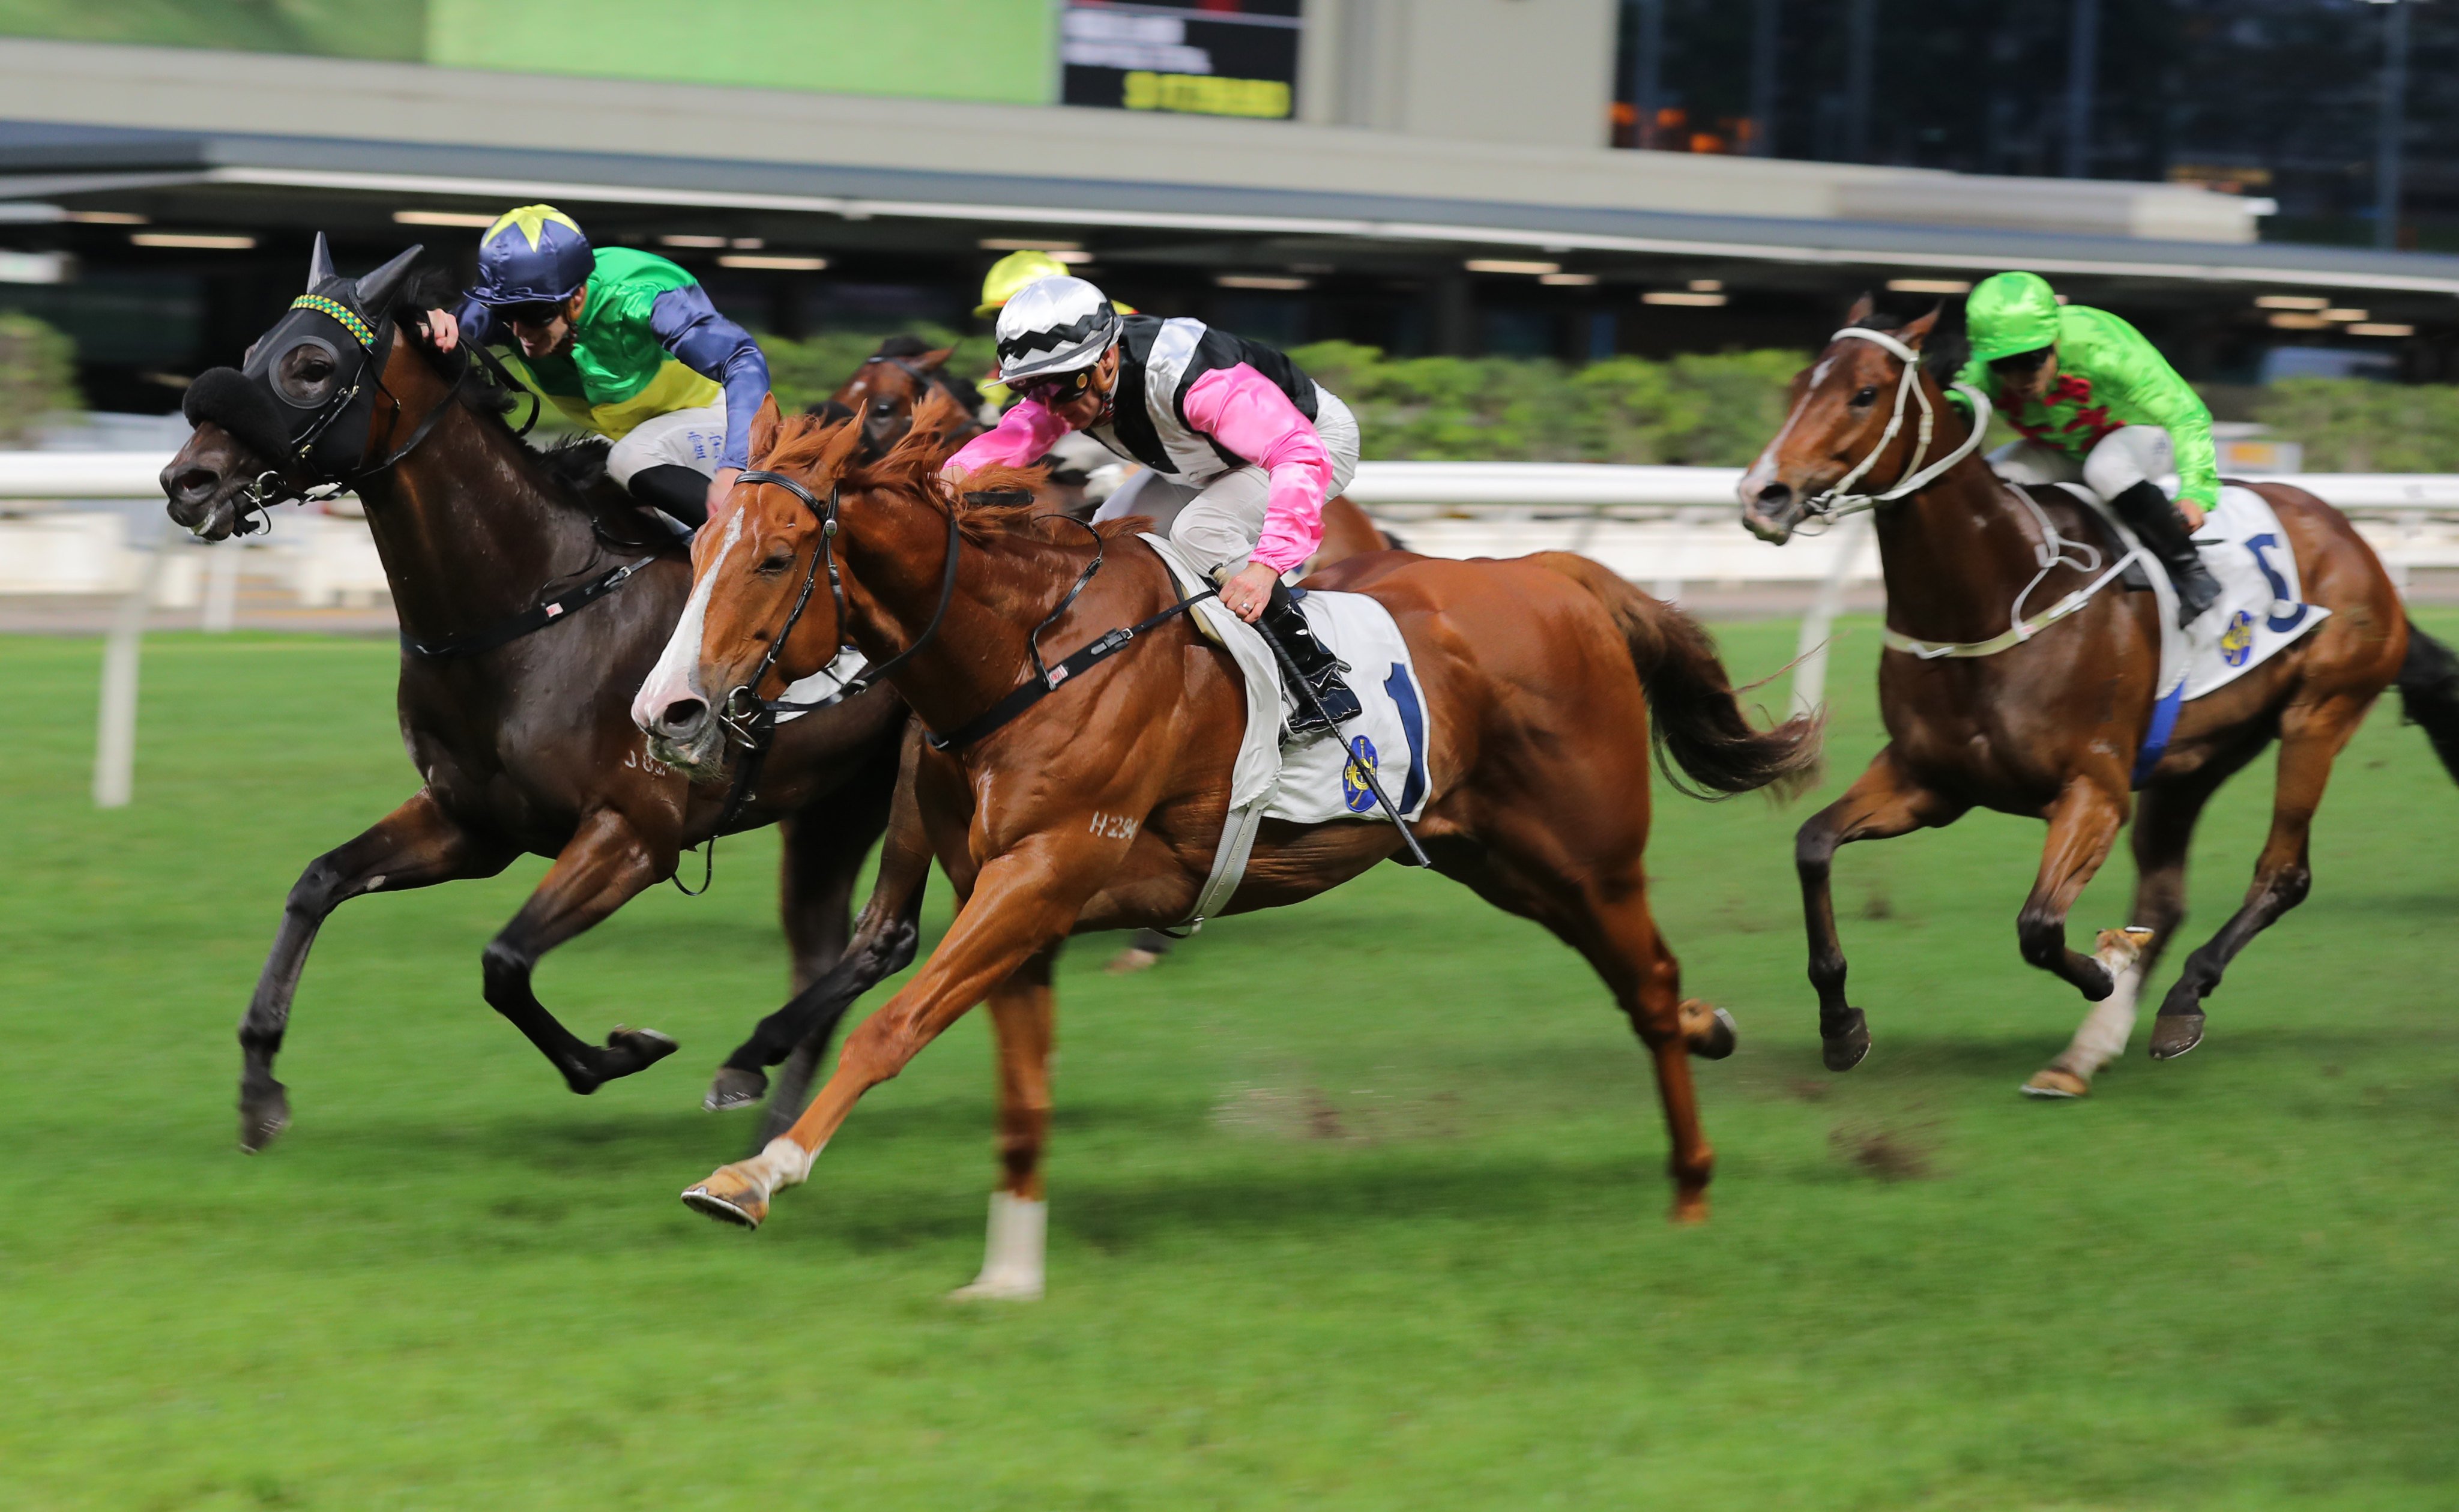 Beauty Waves wins at Happy Valley on April 24 under Zac Purton. Photos: Kenneth Chan